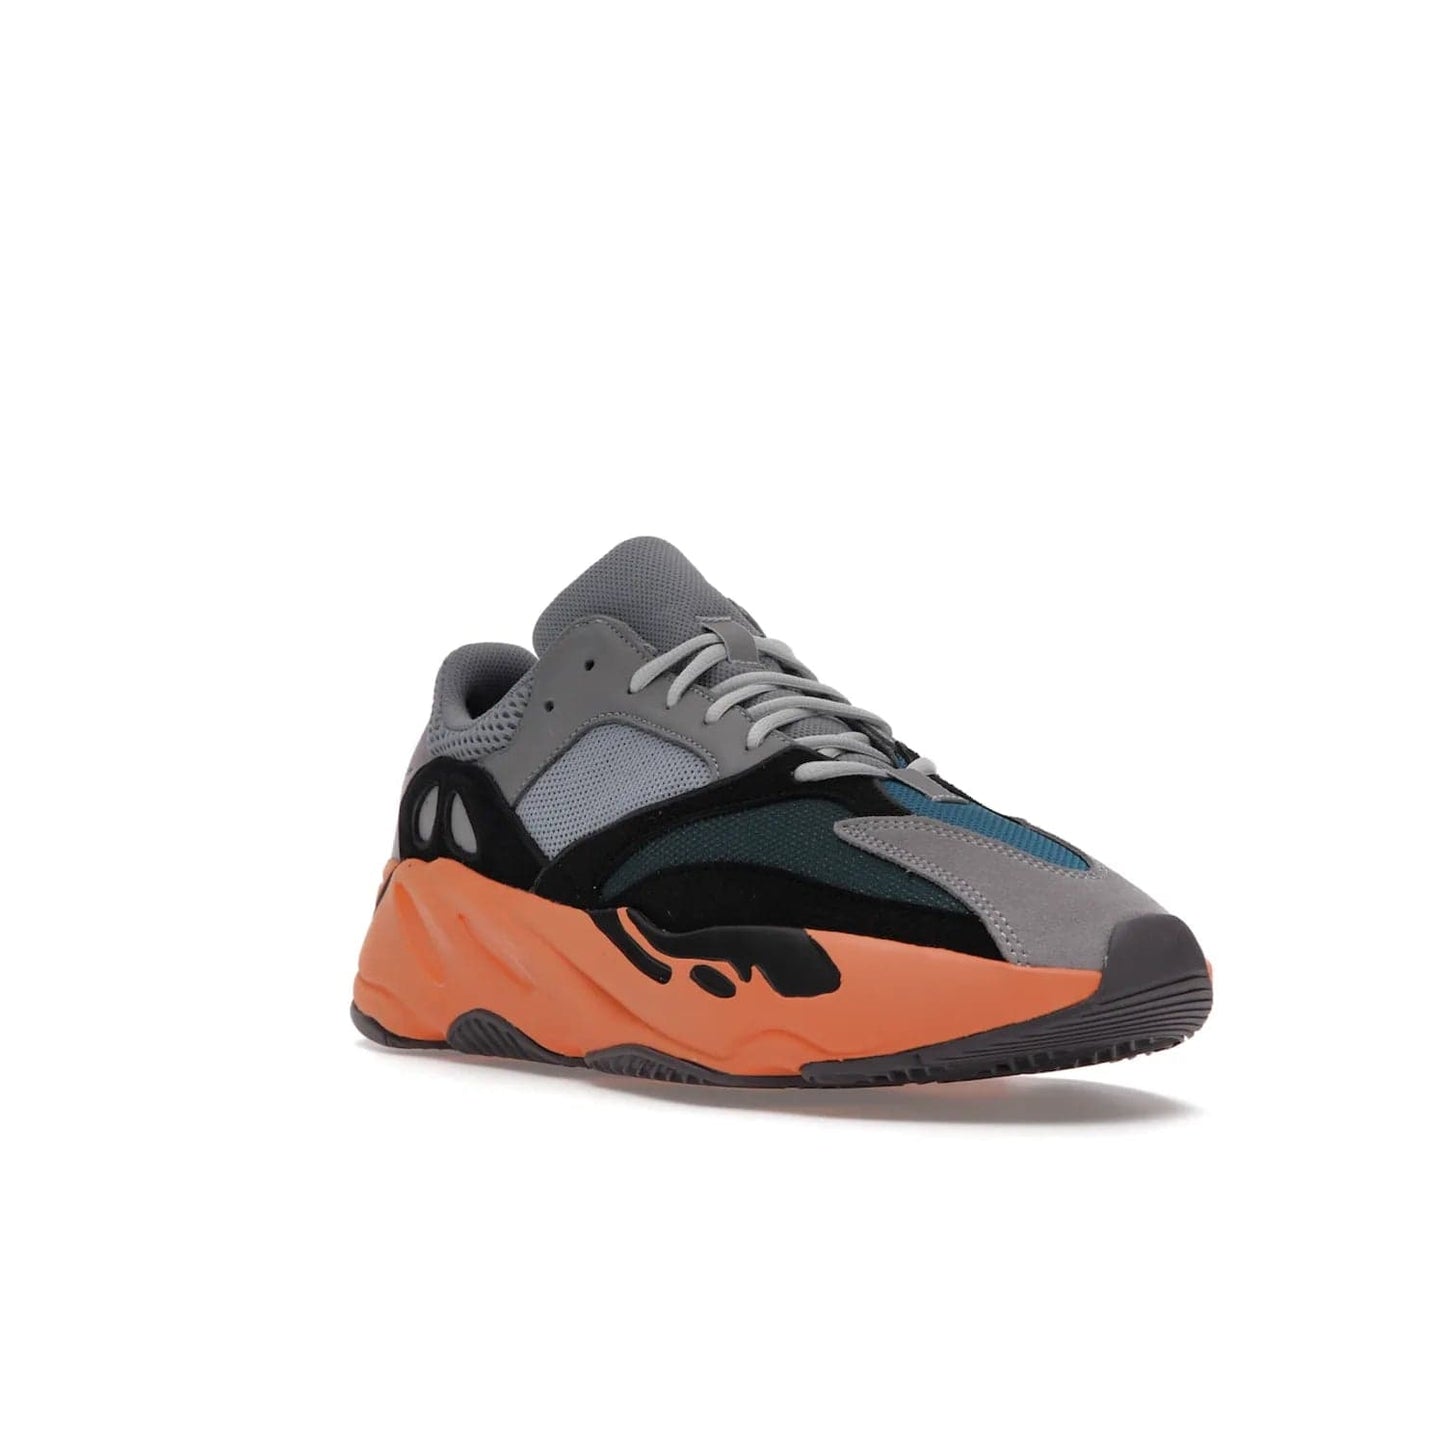 adidas Yeezy Boost 700 Wash Orange - Image 6 - Only at www.BallersClubKickz.com - Introducing the adidas Yeezy Boost 700 Wash Orange. Unique grey leather, suede, mesh upper and teal panels with a chunky Wash Orange Boost midsole. Release October 2021, make a statement today!